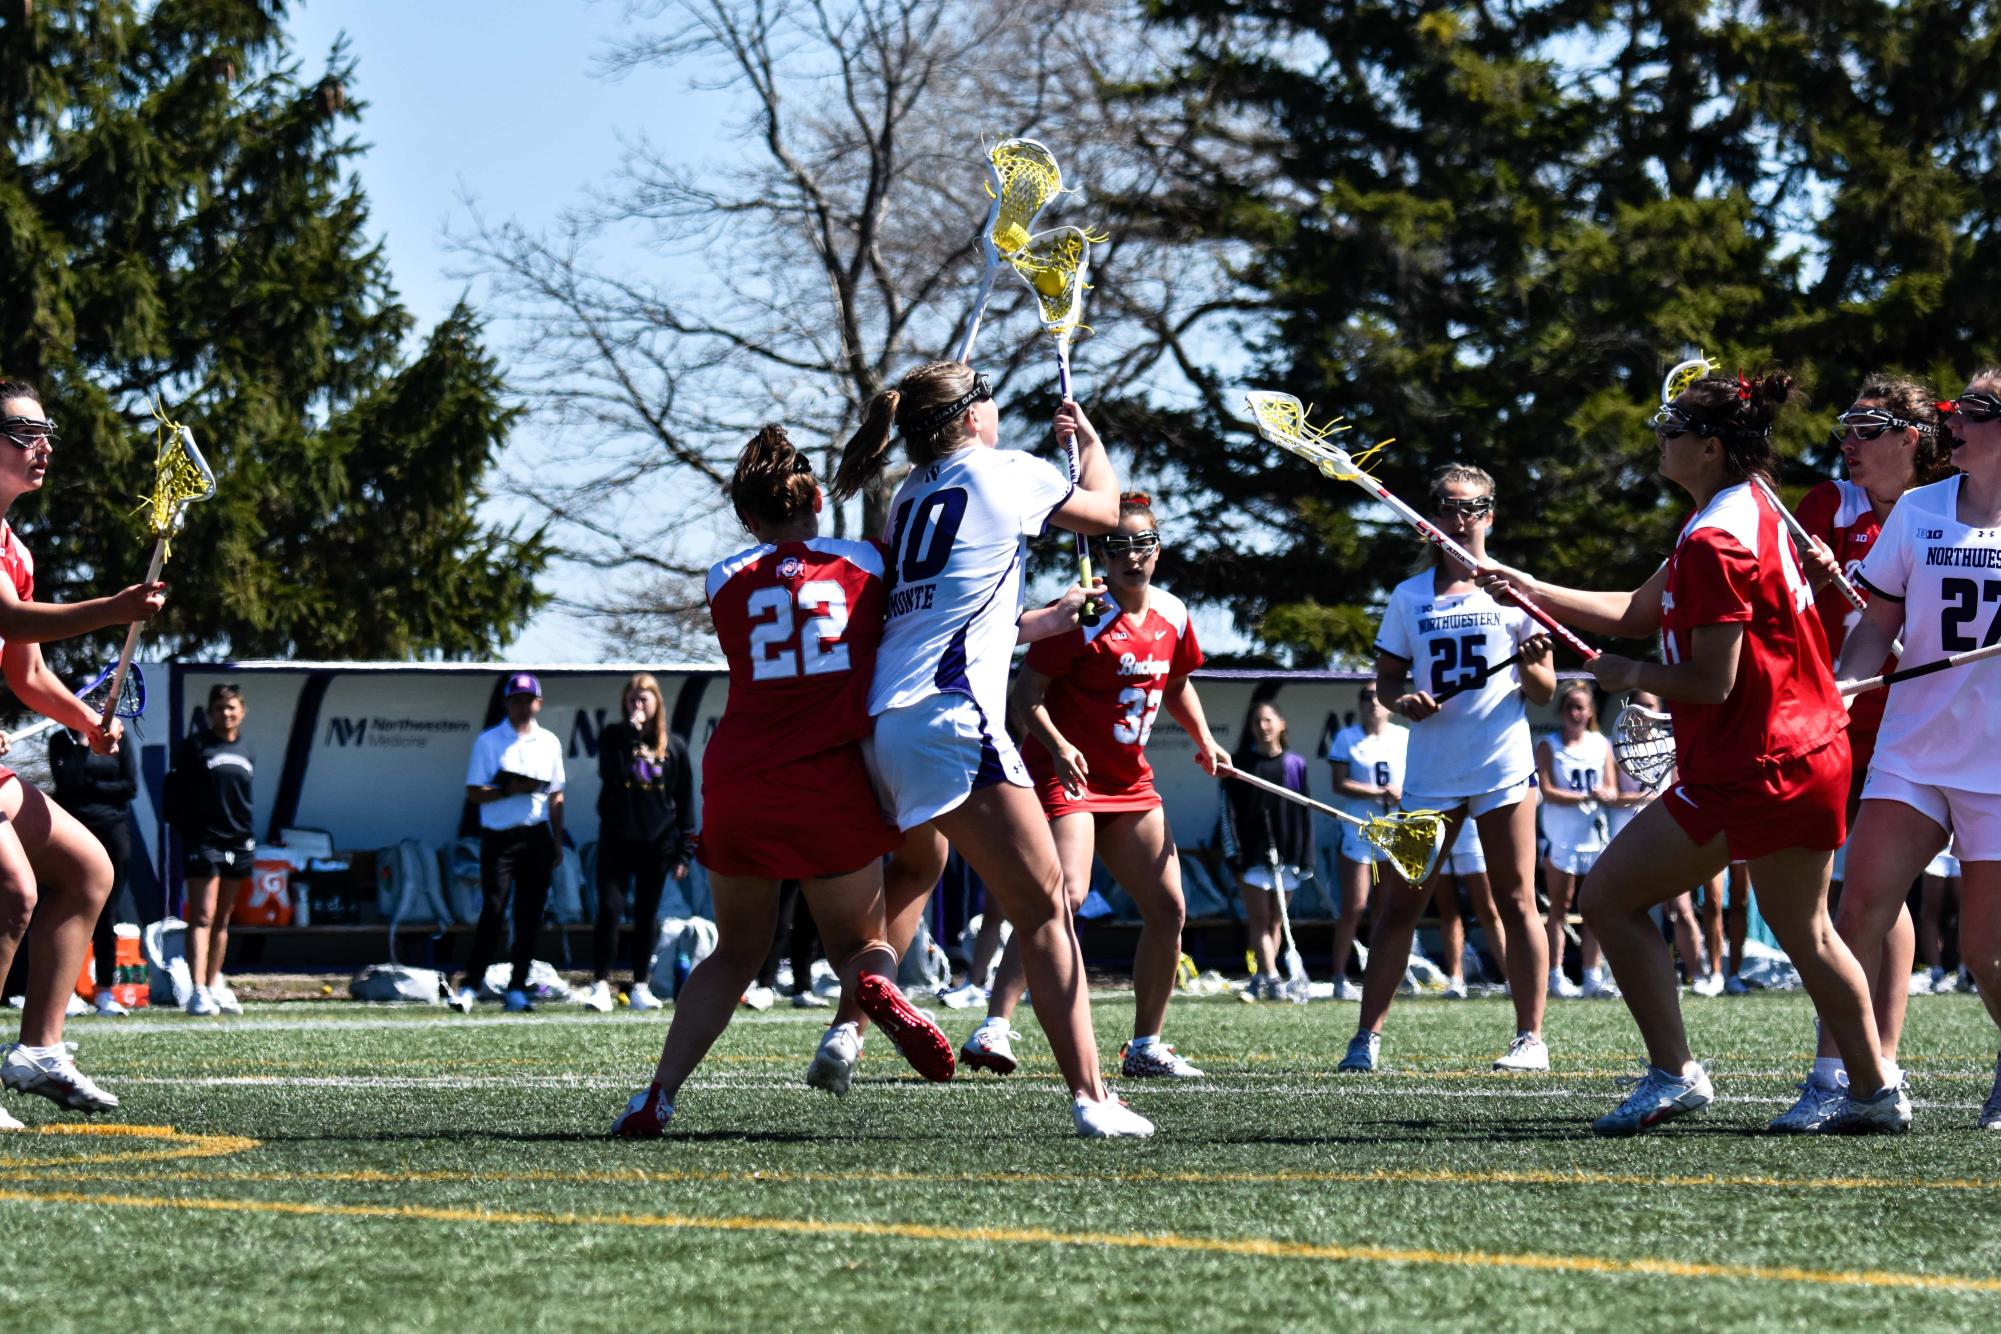 A Northwestern lacrosse player wearing white defends the ball from a player wearing red.